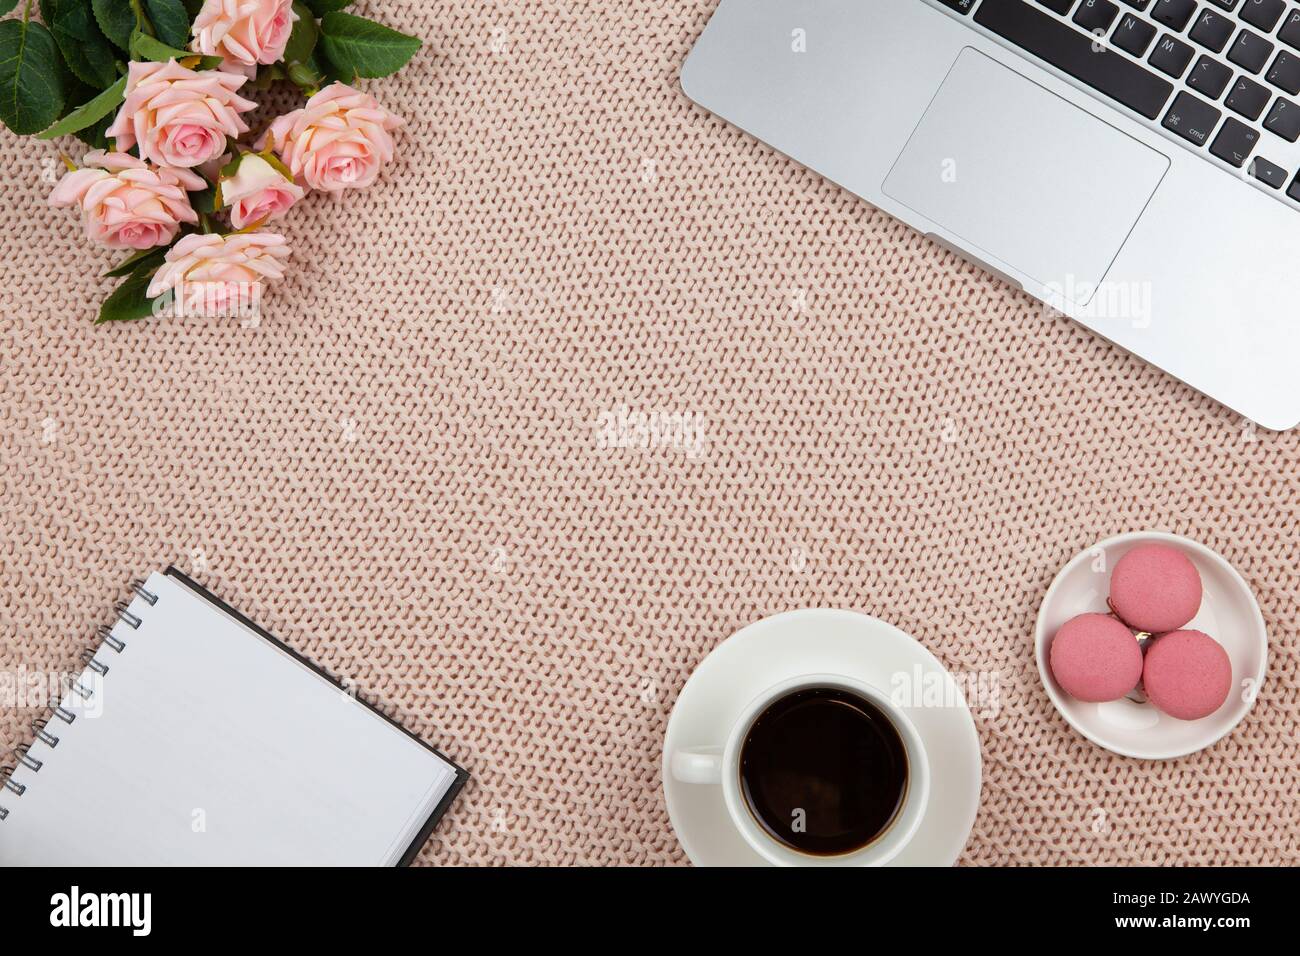 Work from home concept. Modern female working space, top view. Laptop, coffee, cakes, roses, notebook on knitted blanket, copy space, flat lay. Deskto Stock Photo